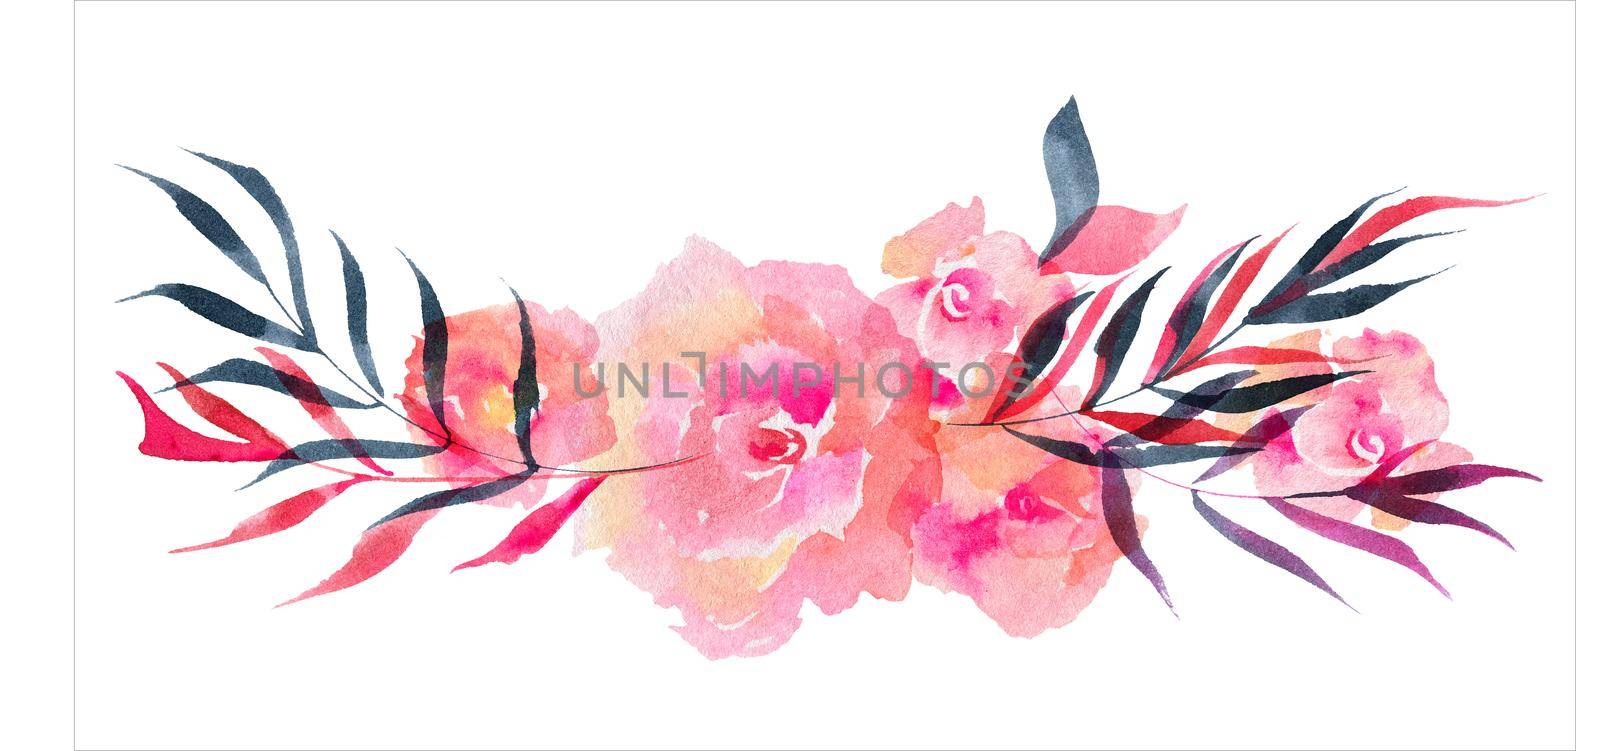 Floral rose garland. Watercolor composition of rose flowers and willow branches